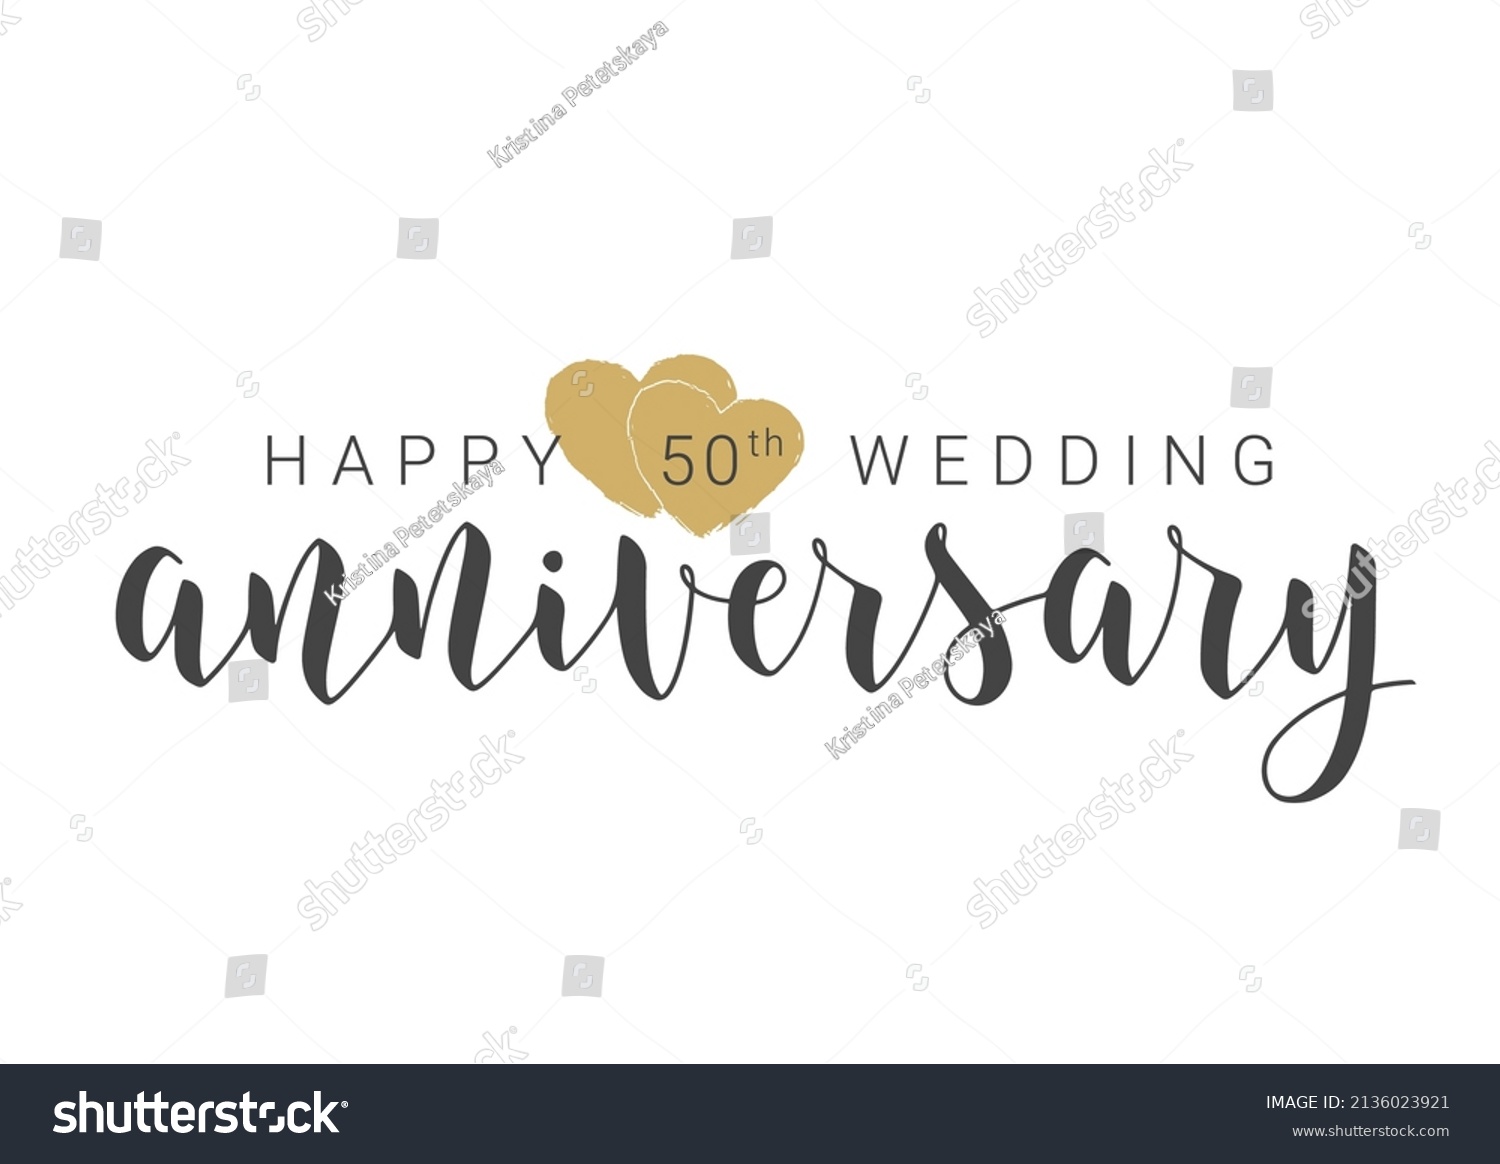 SVG of Vector Illustration. Handwritten Lettering of Happy 50th Wedding Anniversary. Template for Banner, Card, Label, Postcard, Poster, Sticker, Print or Web Product. Objects Isolated on White Background. svg